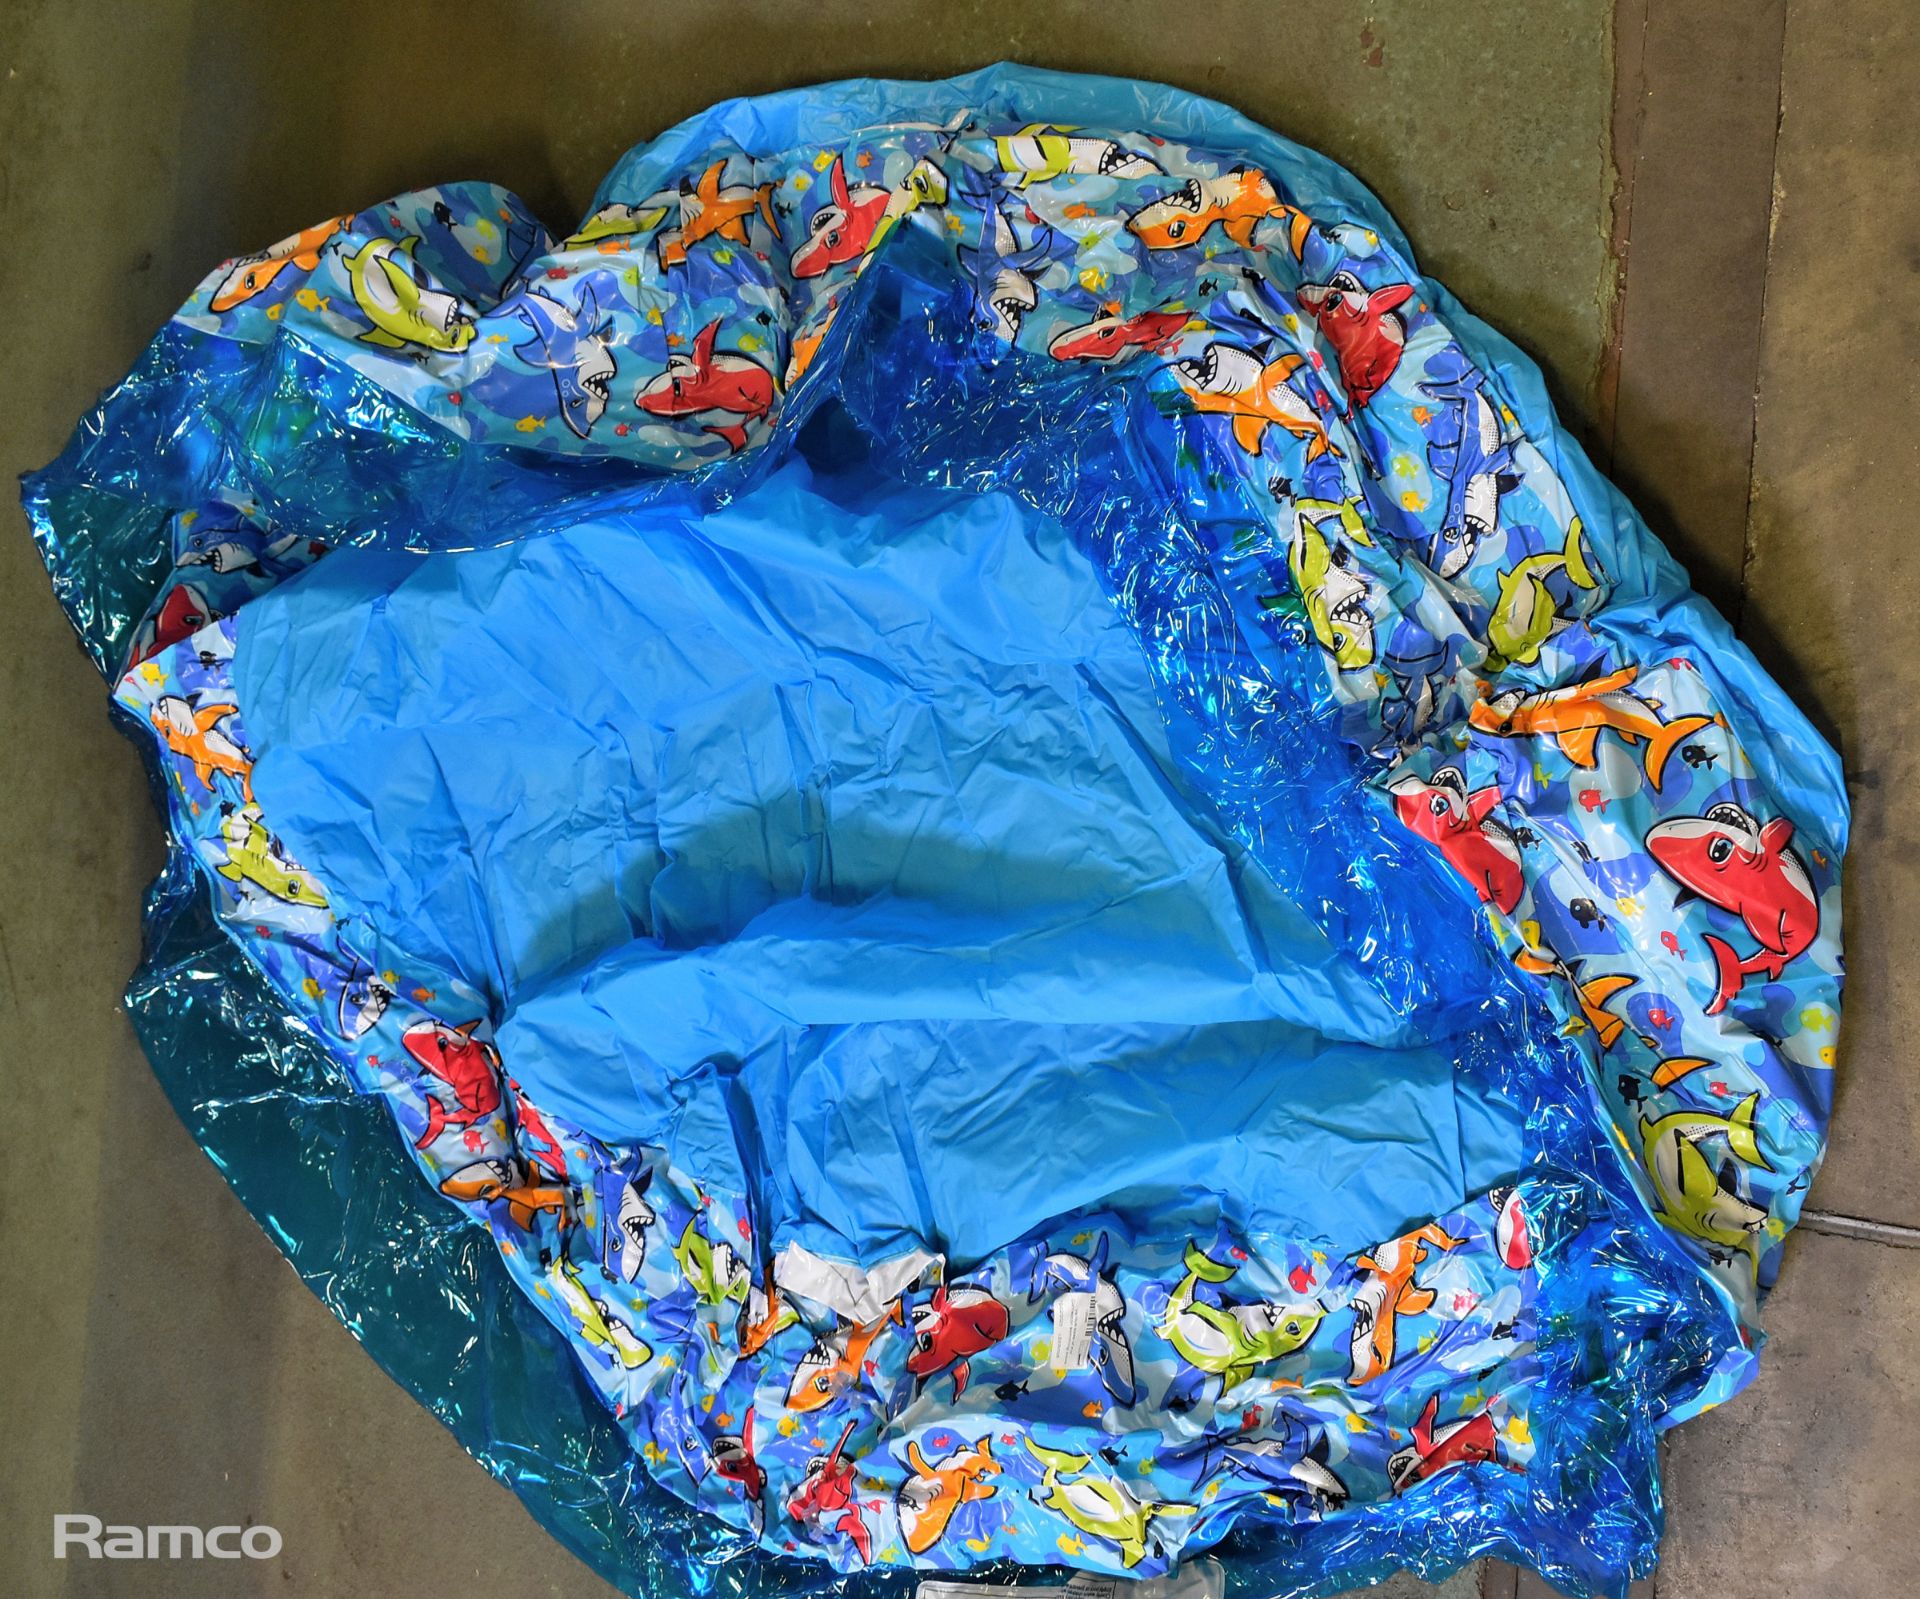 Various sizes of Kid Connection swimming pools - CUSTOMER RETURNS - in need of repair - Image 3 of 6